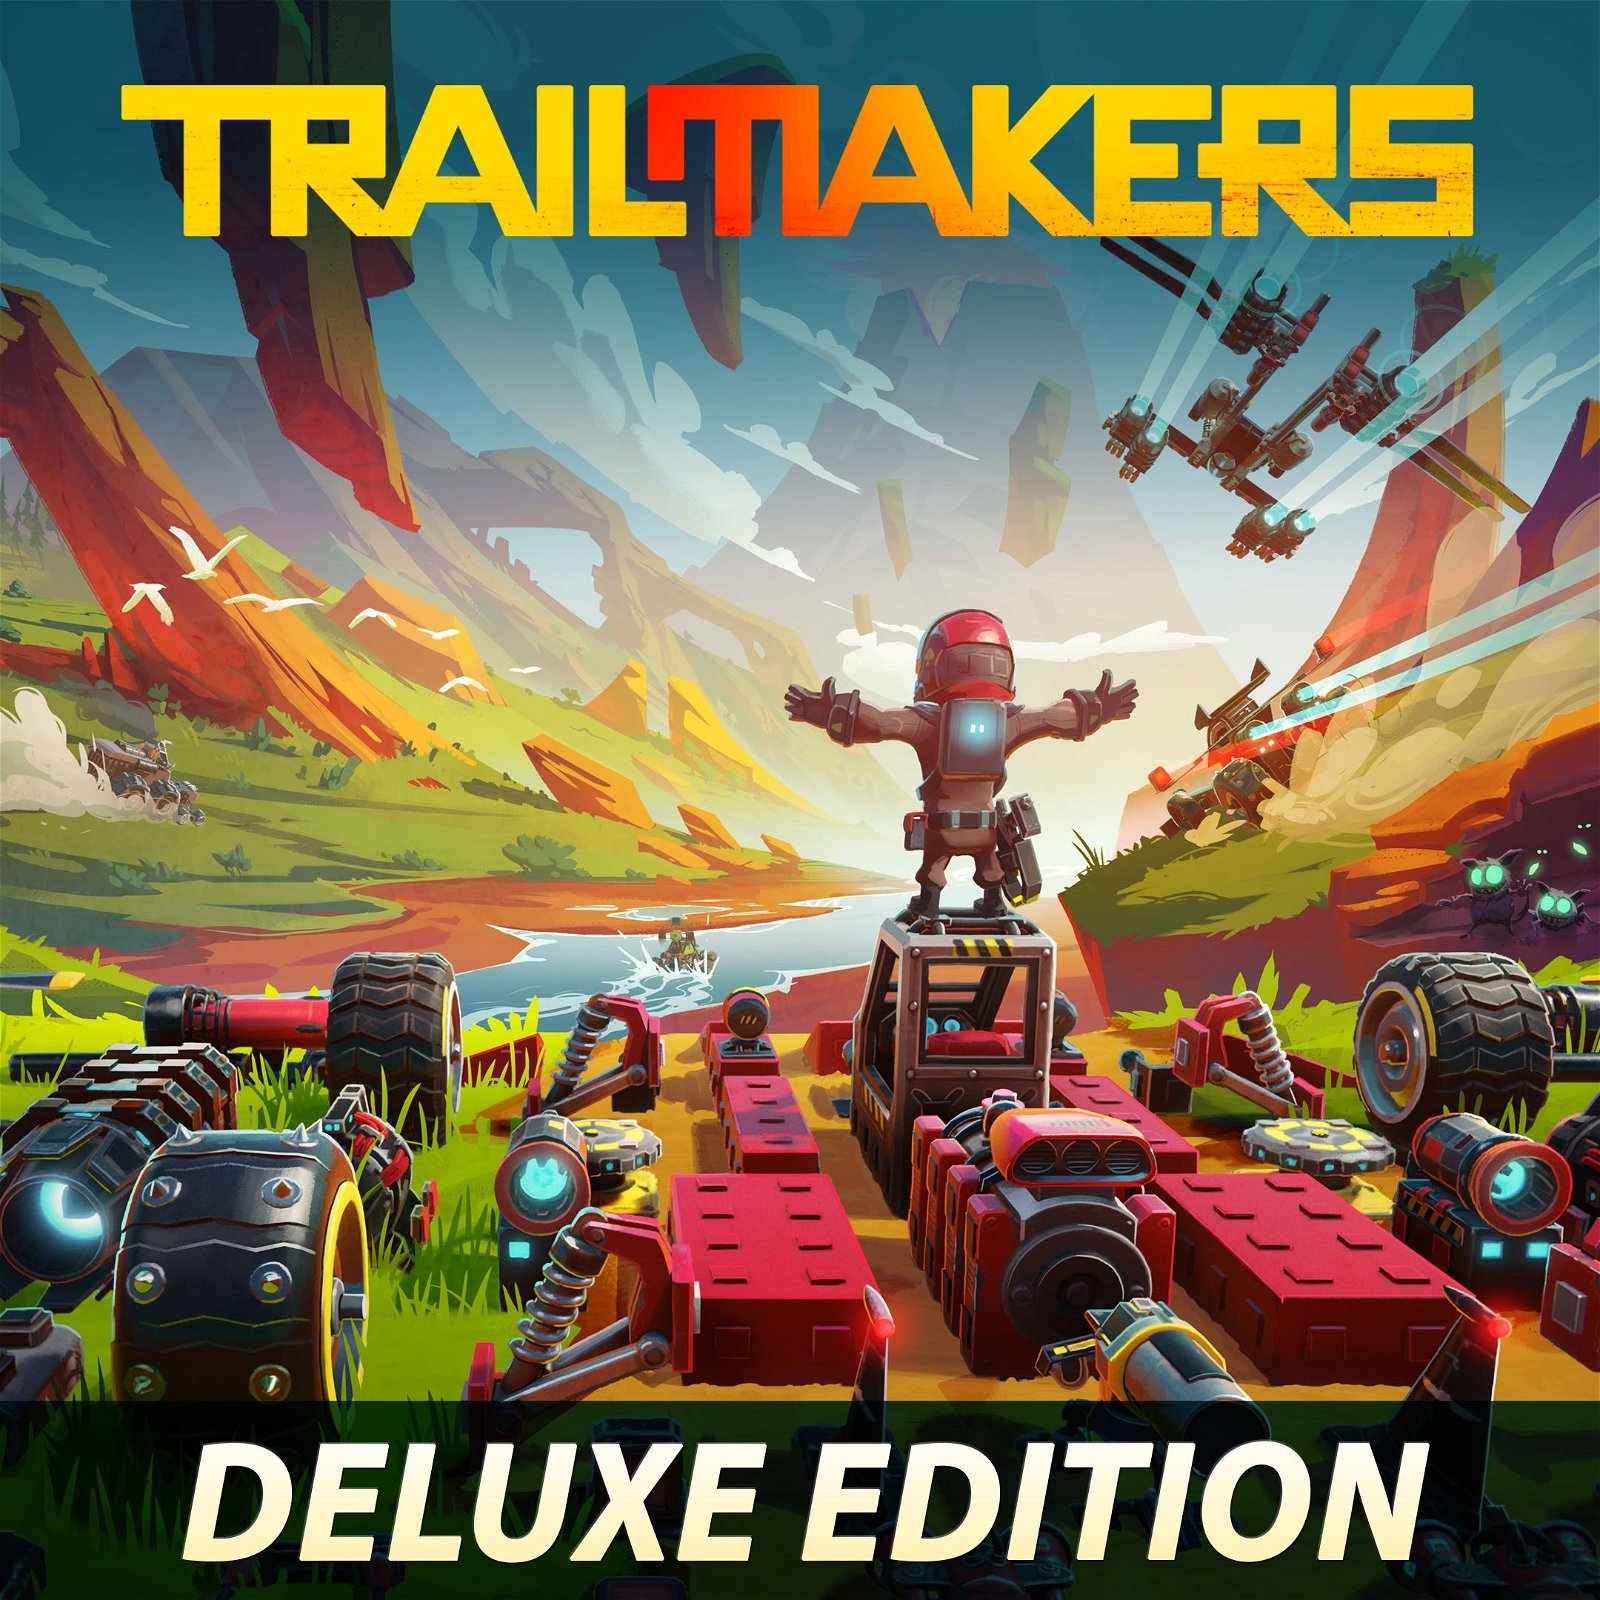 Image of Trailmakers Deluxe Edition